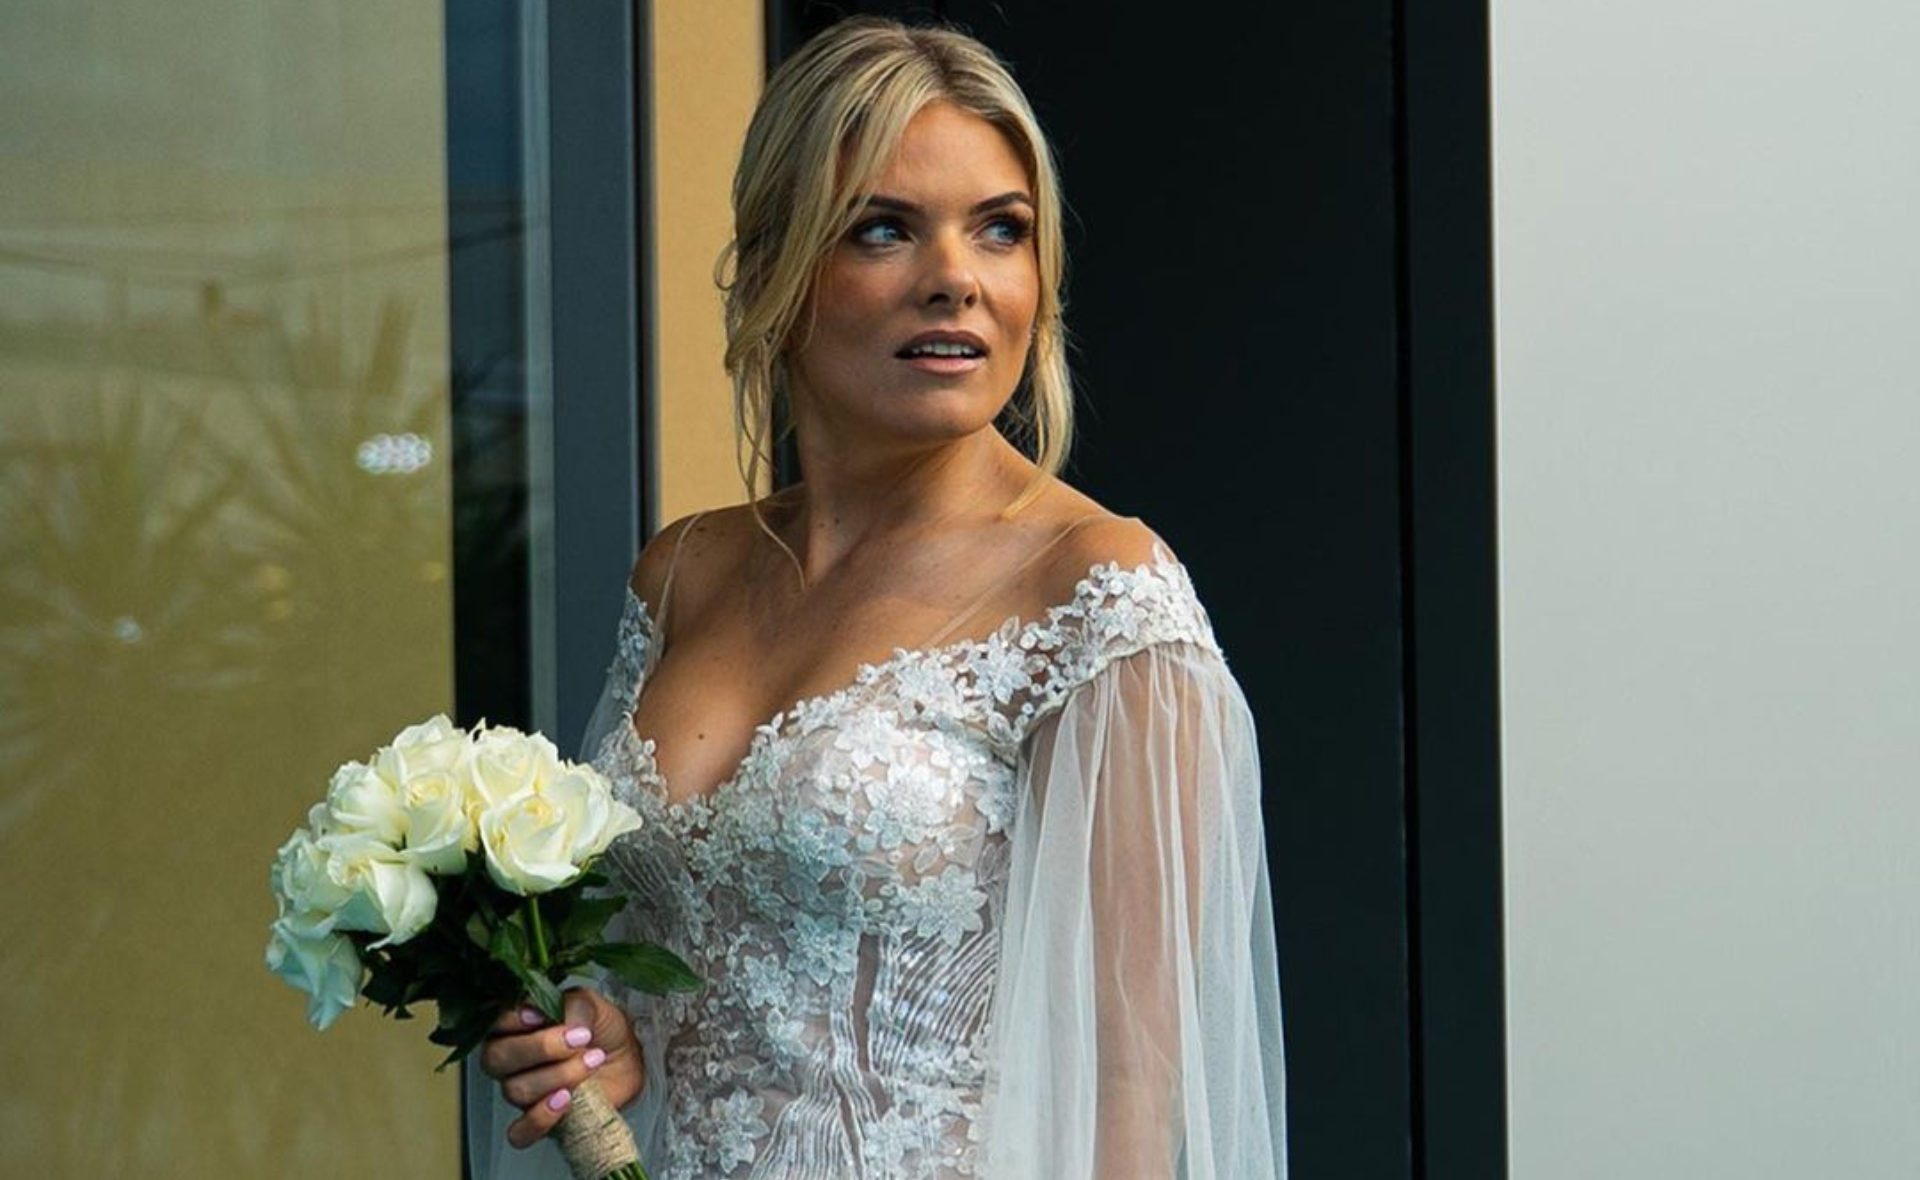 After never envisaging being a “39-year-old single mum,” Erin Molan says “I do” to herself